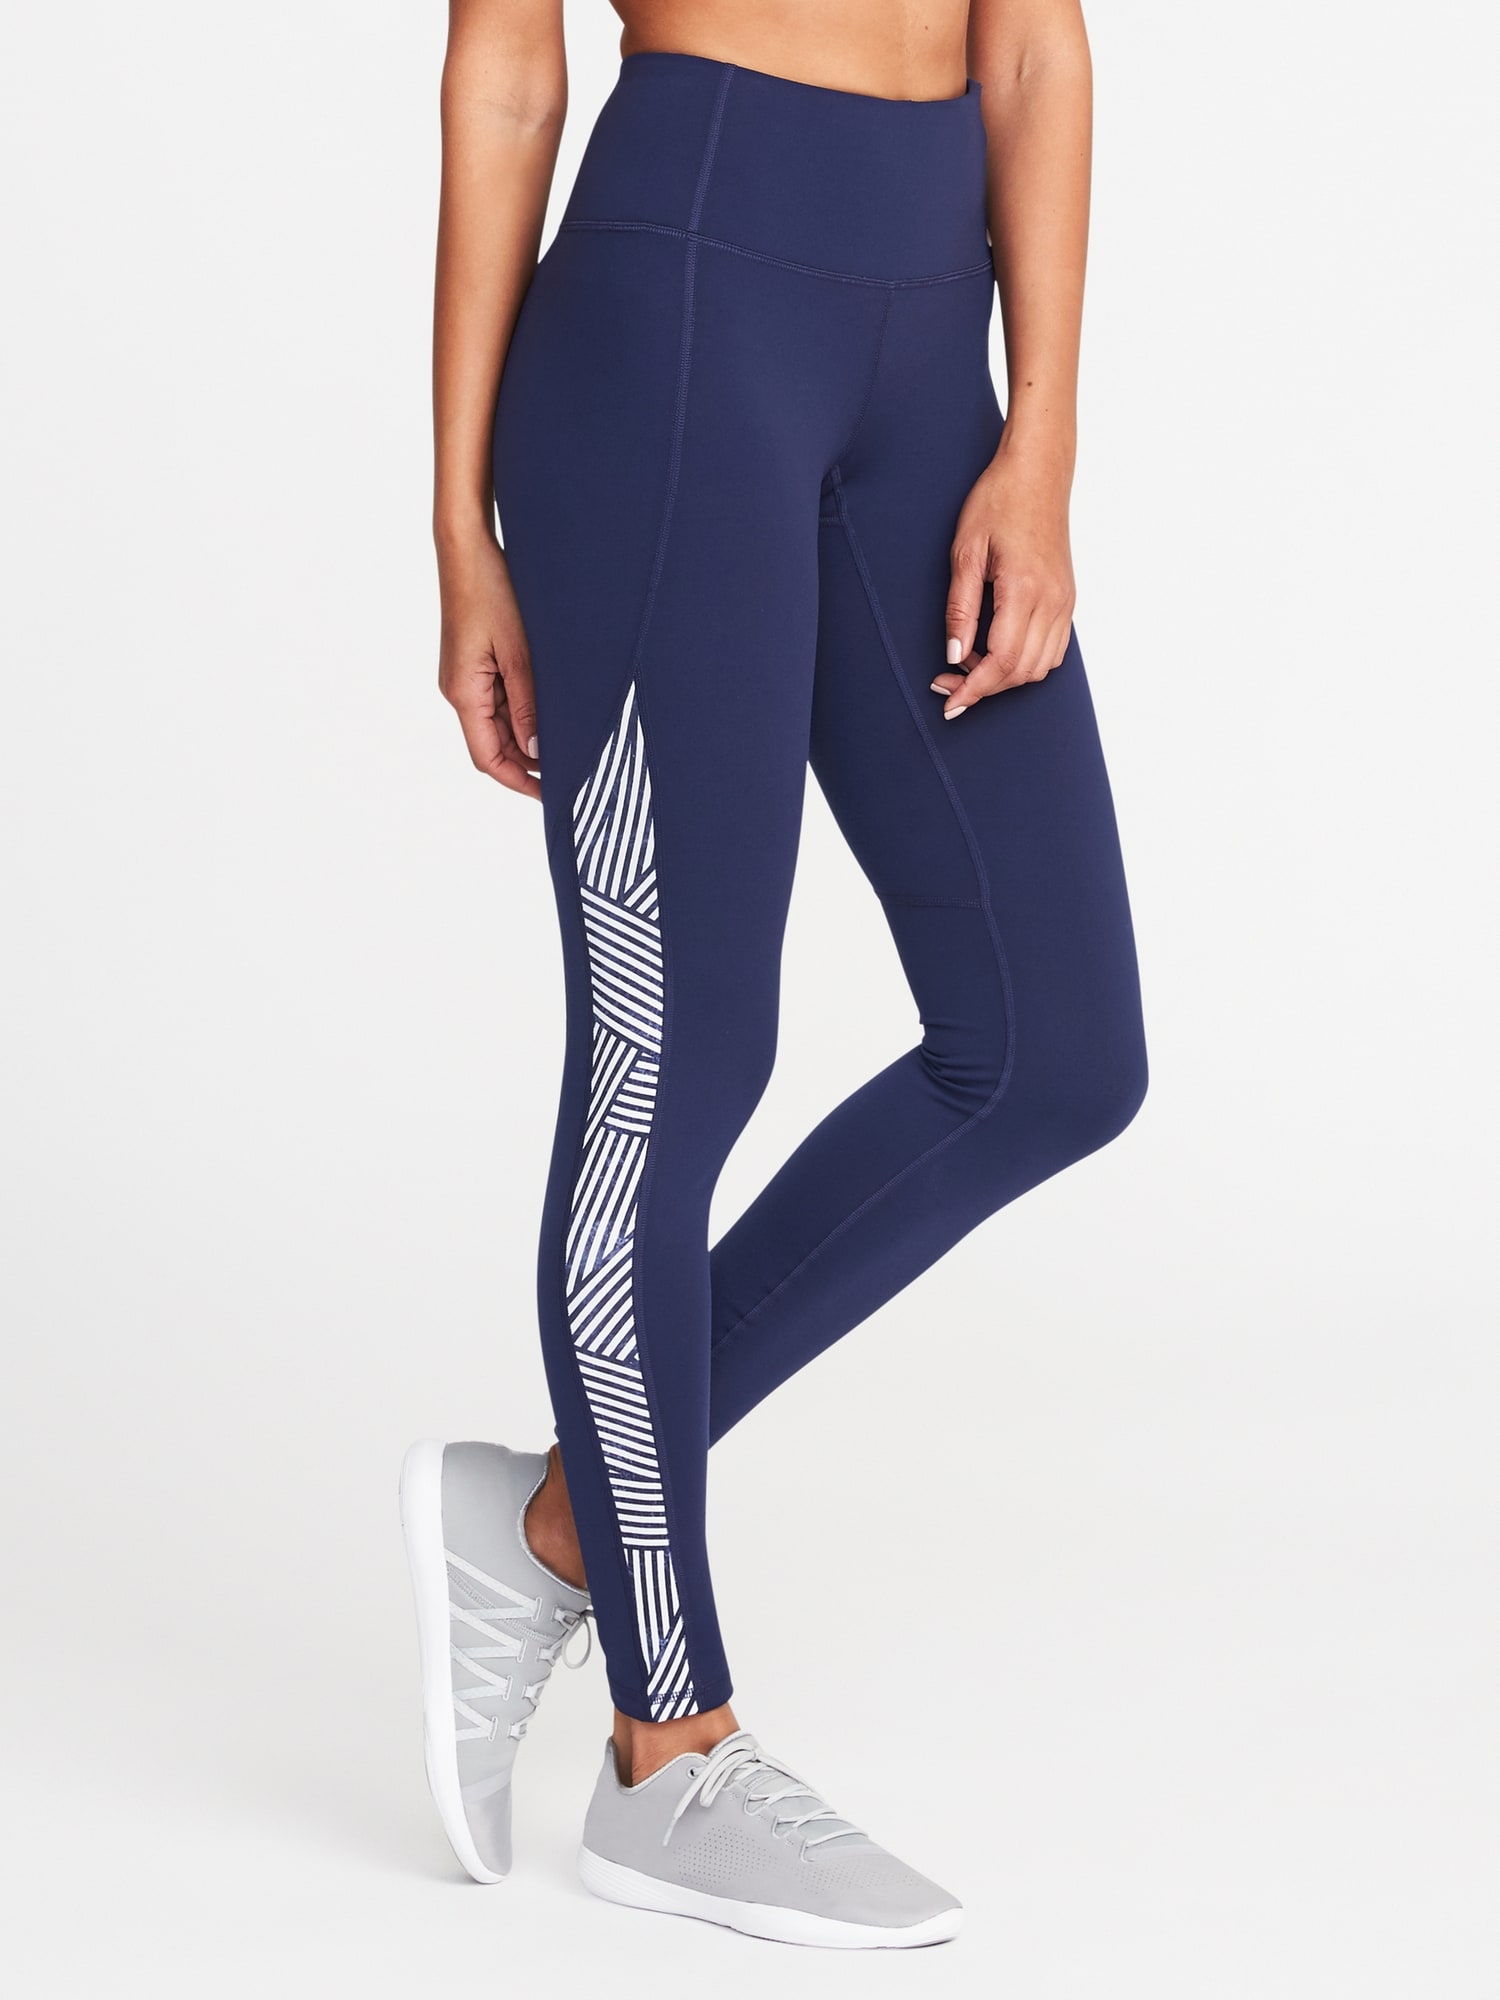 Mid-Rise Printed Side-Stripe Compression Leggings for Women